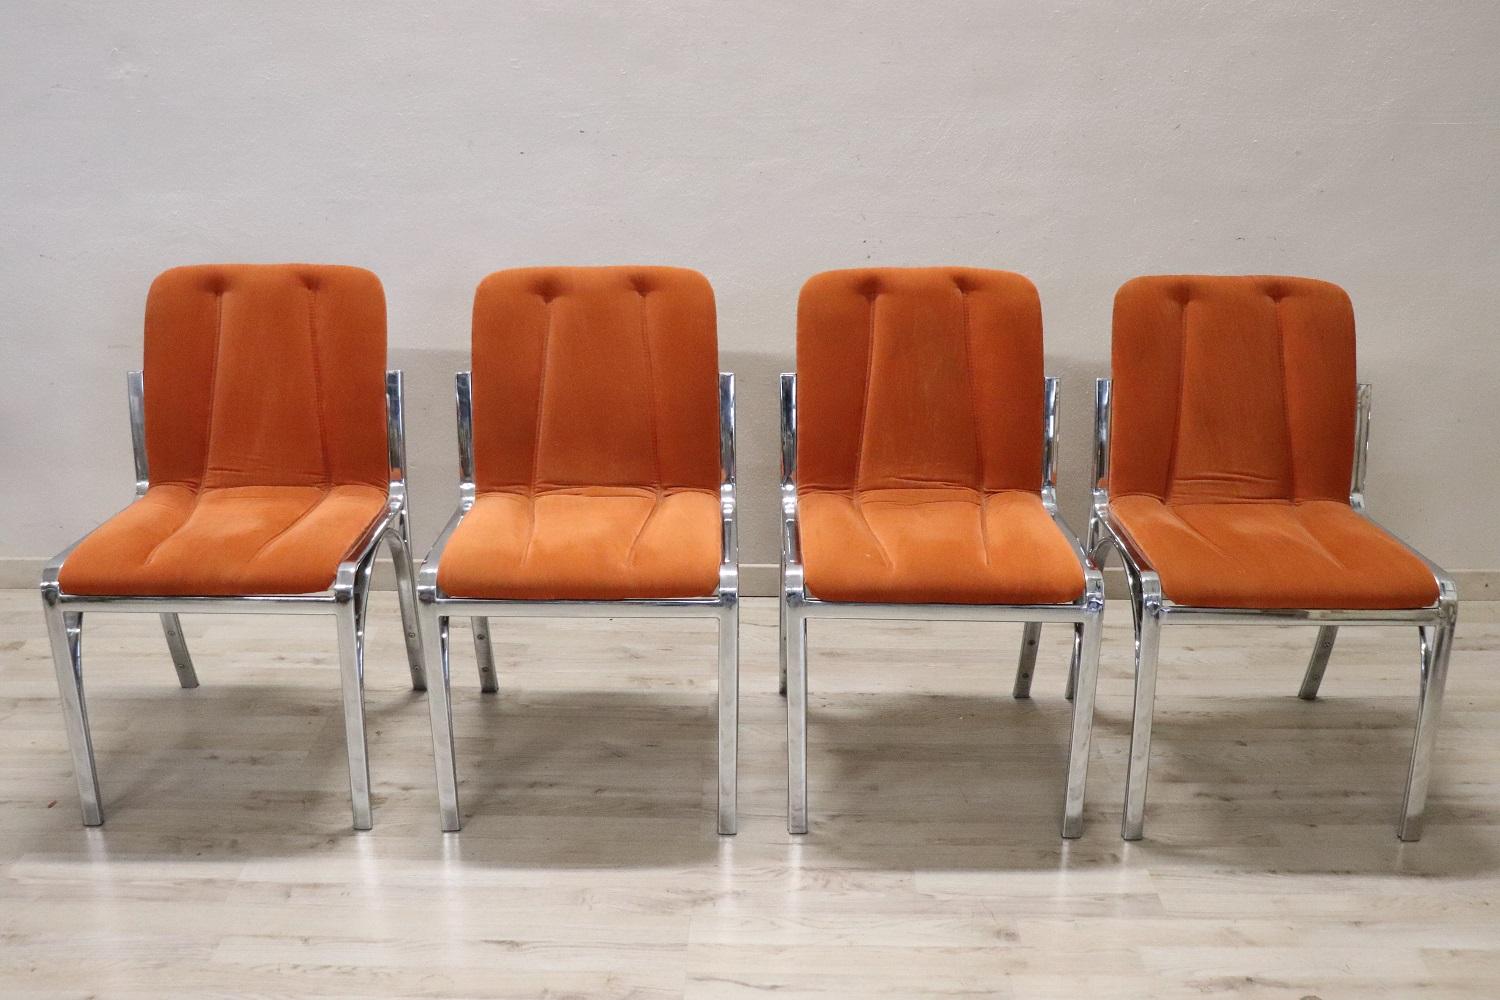 Italian design lovely set of four dining room chairs, 1970s. The chairs are comfortable with a seat orange velvet. The structure is in chromed metal. These chairs are perfect for the modern home. Used, good conditions see photos.

